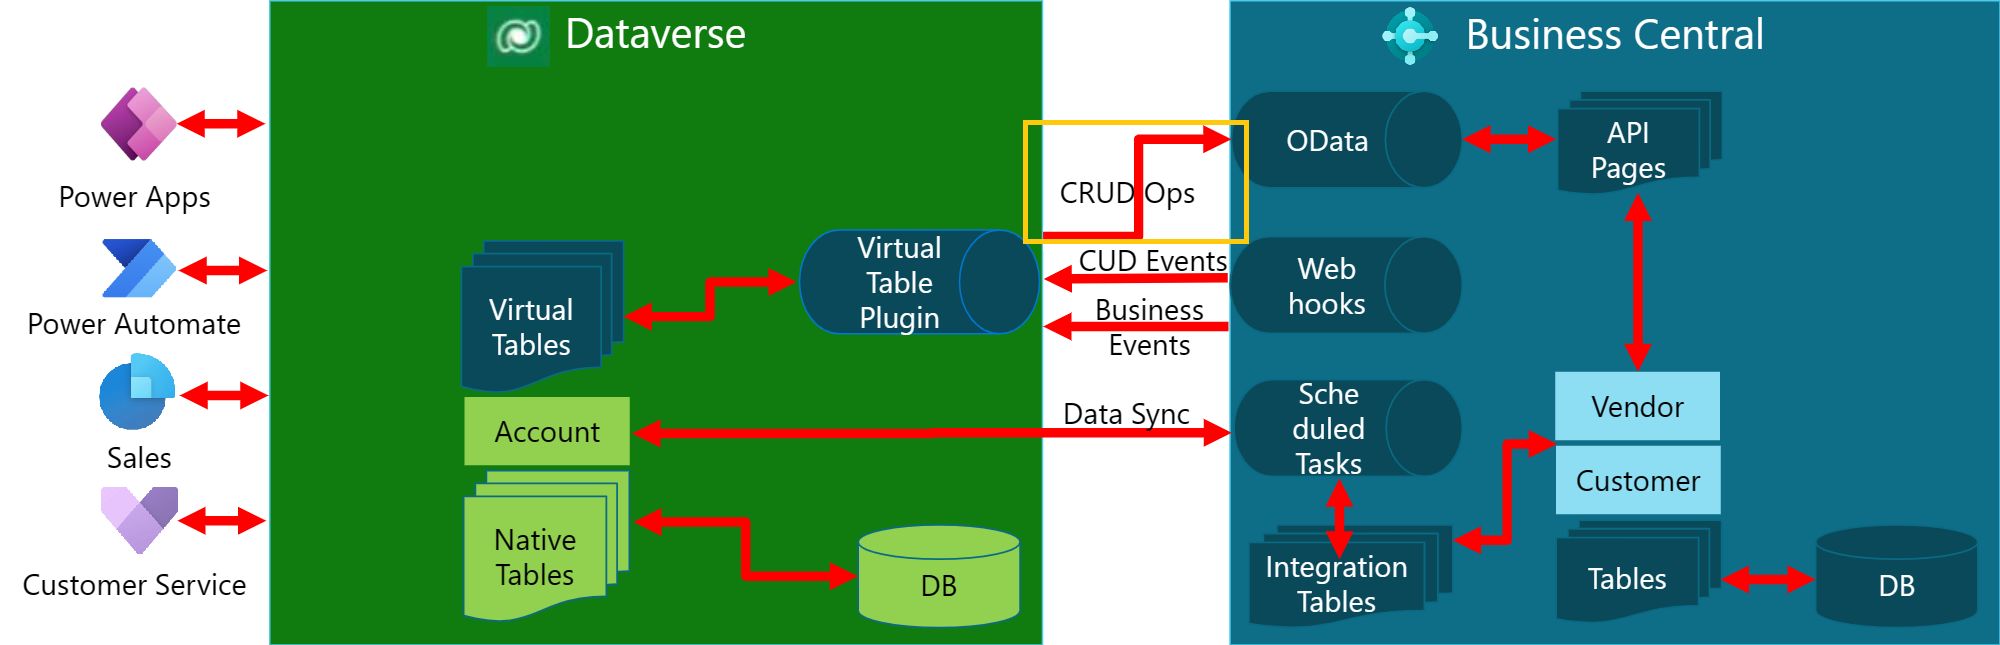 Diagram of the interactions between Dataverse and Business Central